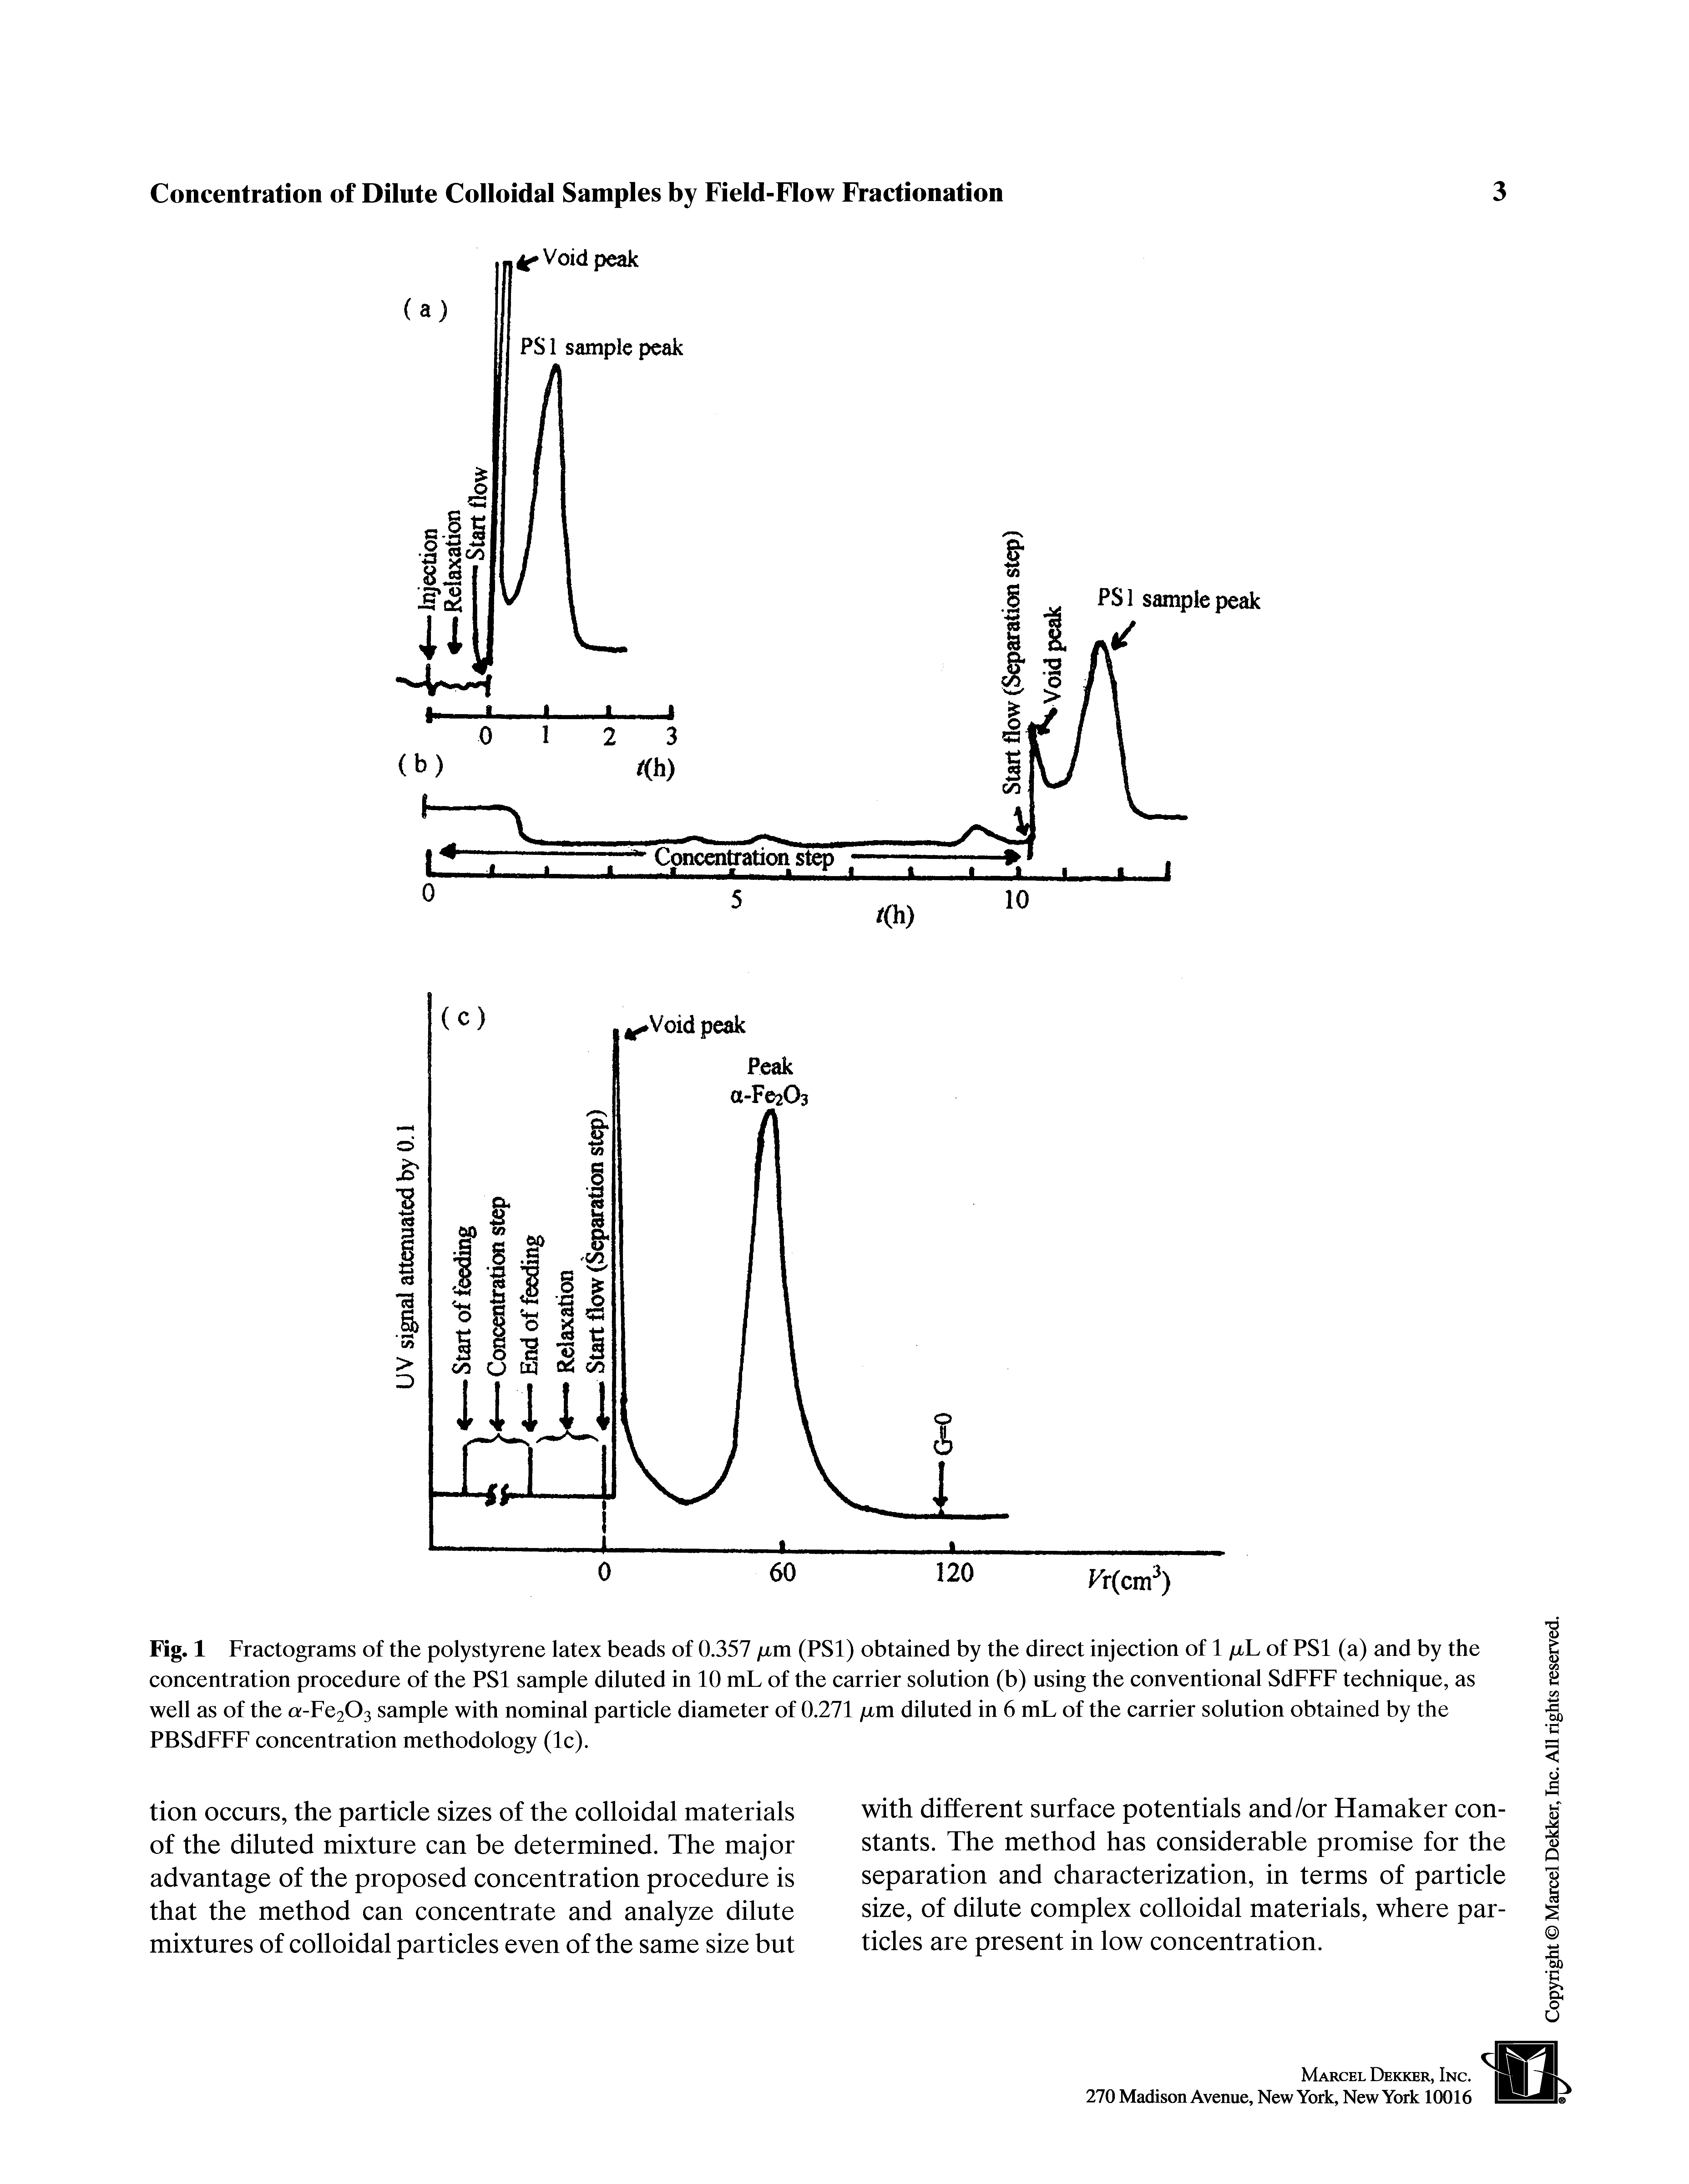 Fig. 1 Fractograms of the polystyrene latex beads of 0.357 /xm (PSl) obtained by the direct injection of 1 julL of PSl (a) and by the concentration procedure of the PSl sample diluted in 10 mL of the carrier solution (b) using the conventional SdFFF technique, as well as of the a-Fe203 sample with nominal particle diameter of 0.271 tm diluted in 6 mL of the carrier solution obtained by the PBSdFFF concentration methodology (Ic).